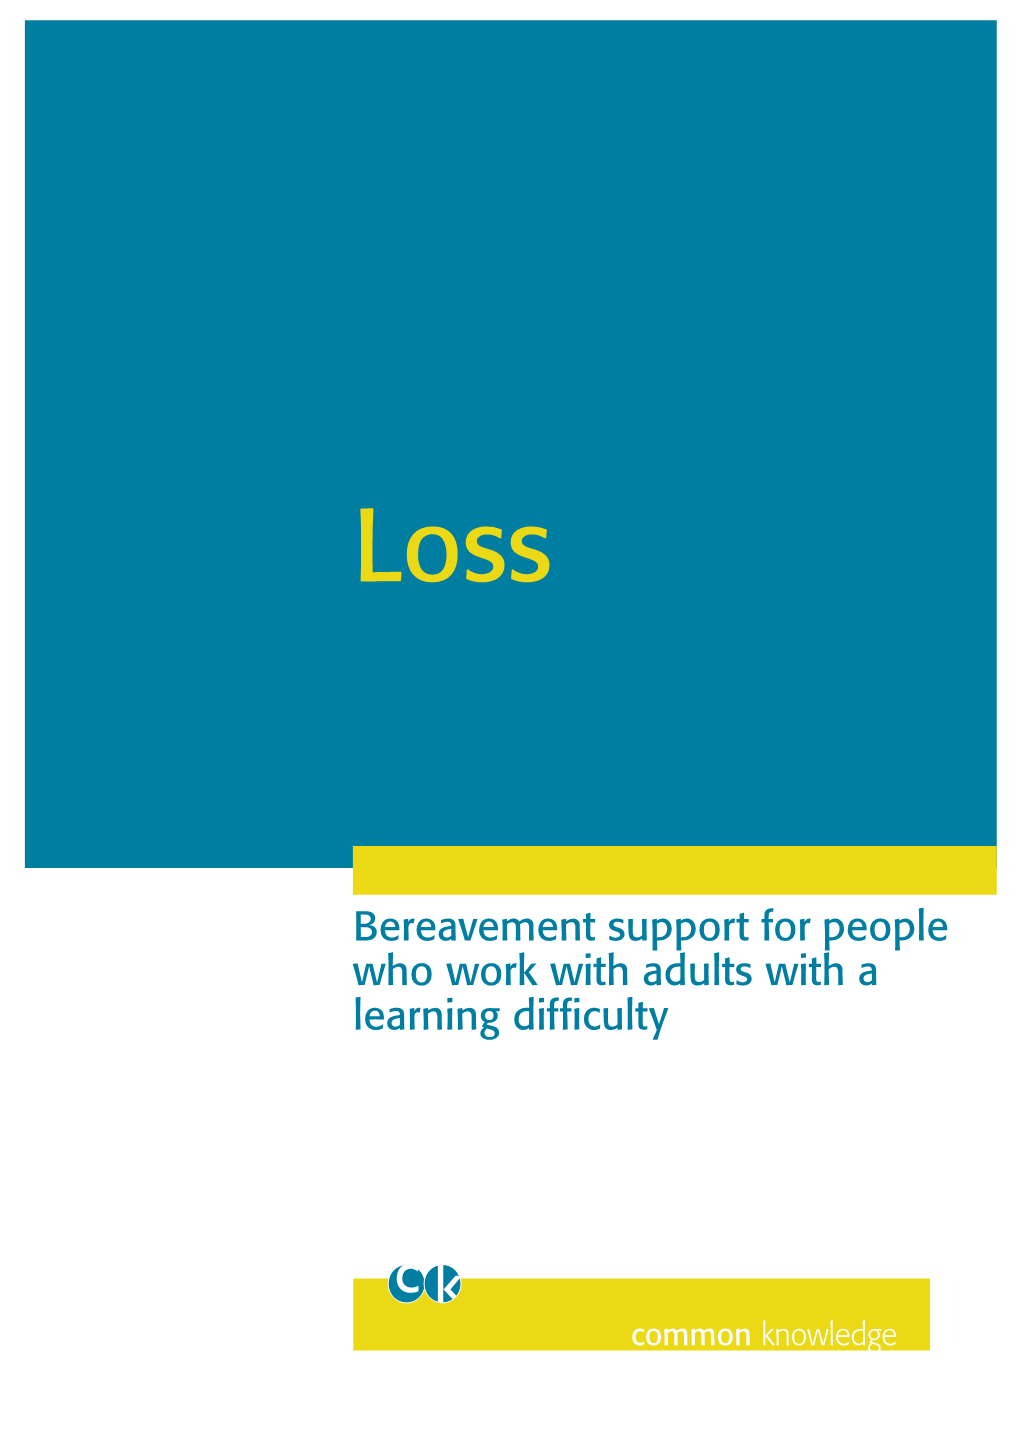 Bereavement Support for People Who Work with Adults with a Learning Difficulty Loss